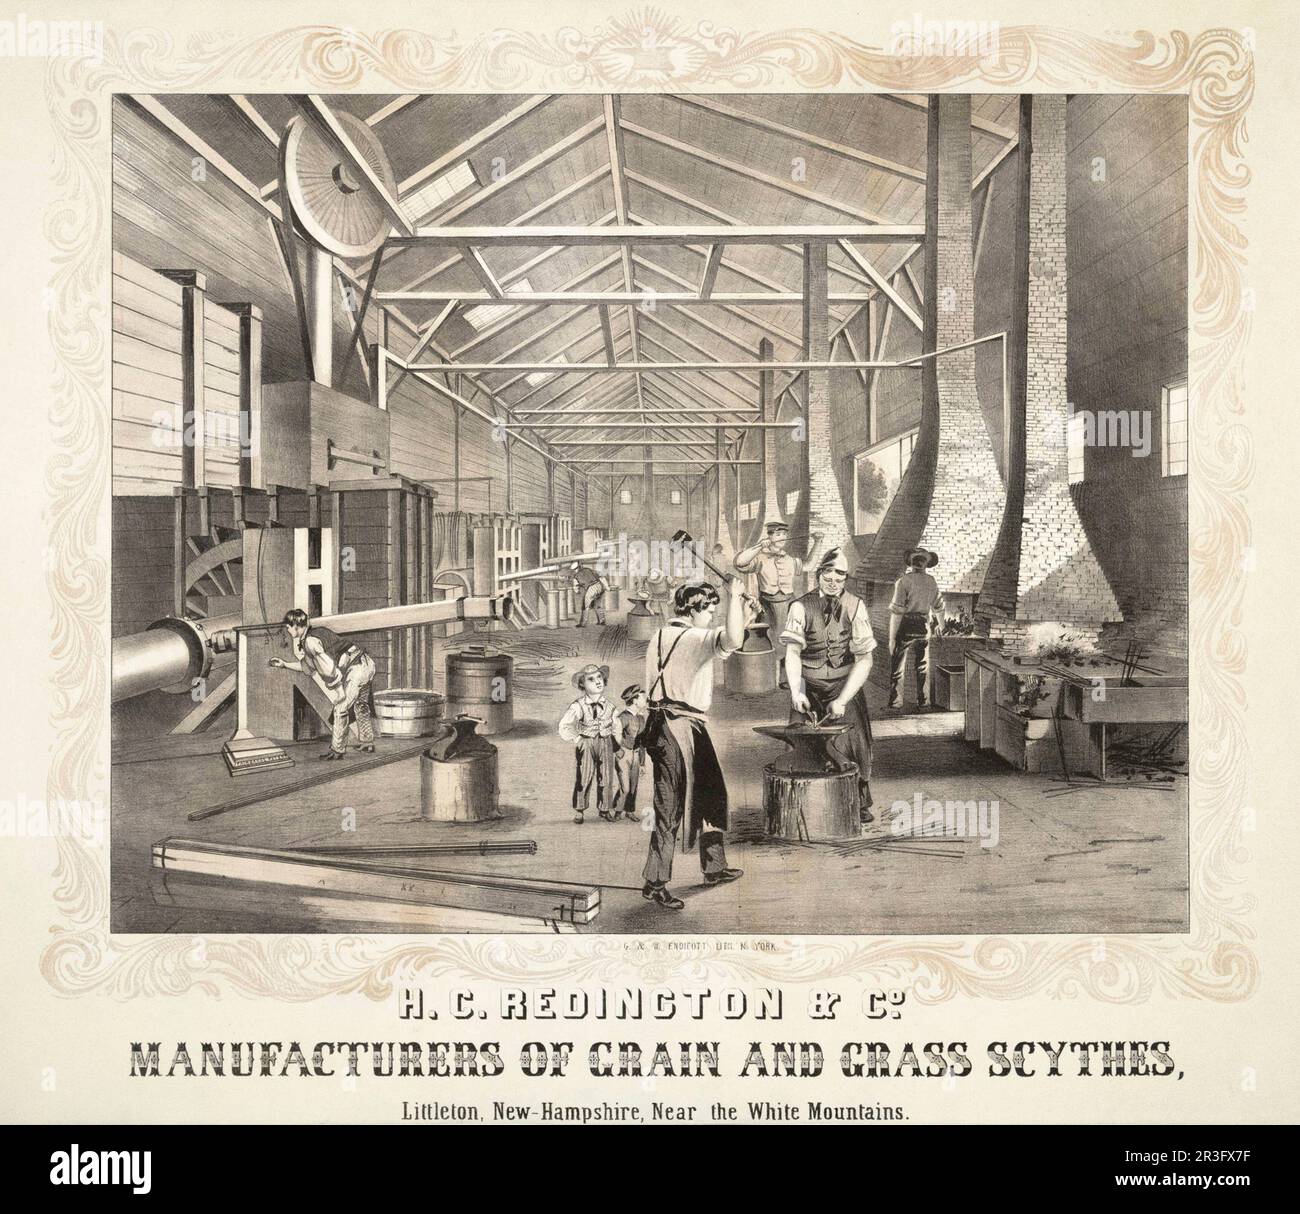 Vintage print showing a view of the building interior of H.C. Redington & Company, a grain and grass scythe manufacturer. Stock Photo